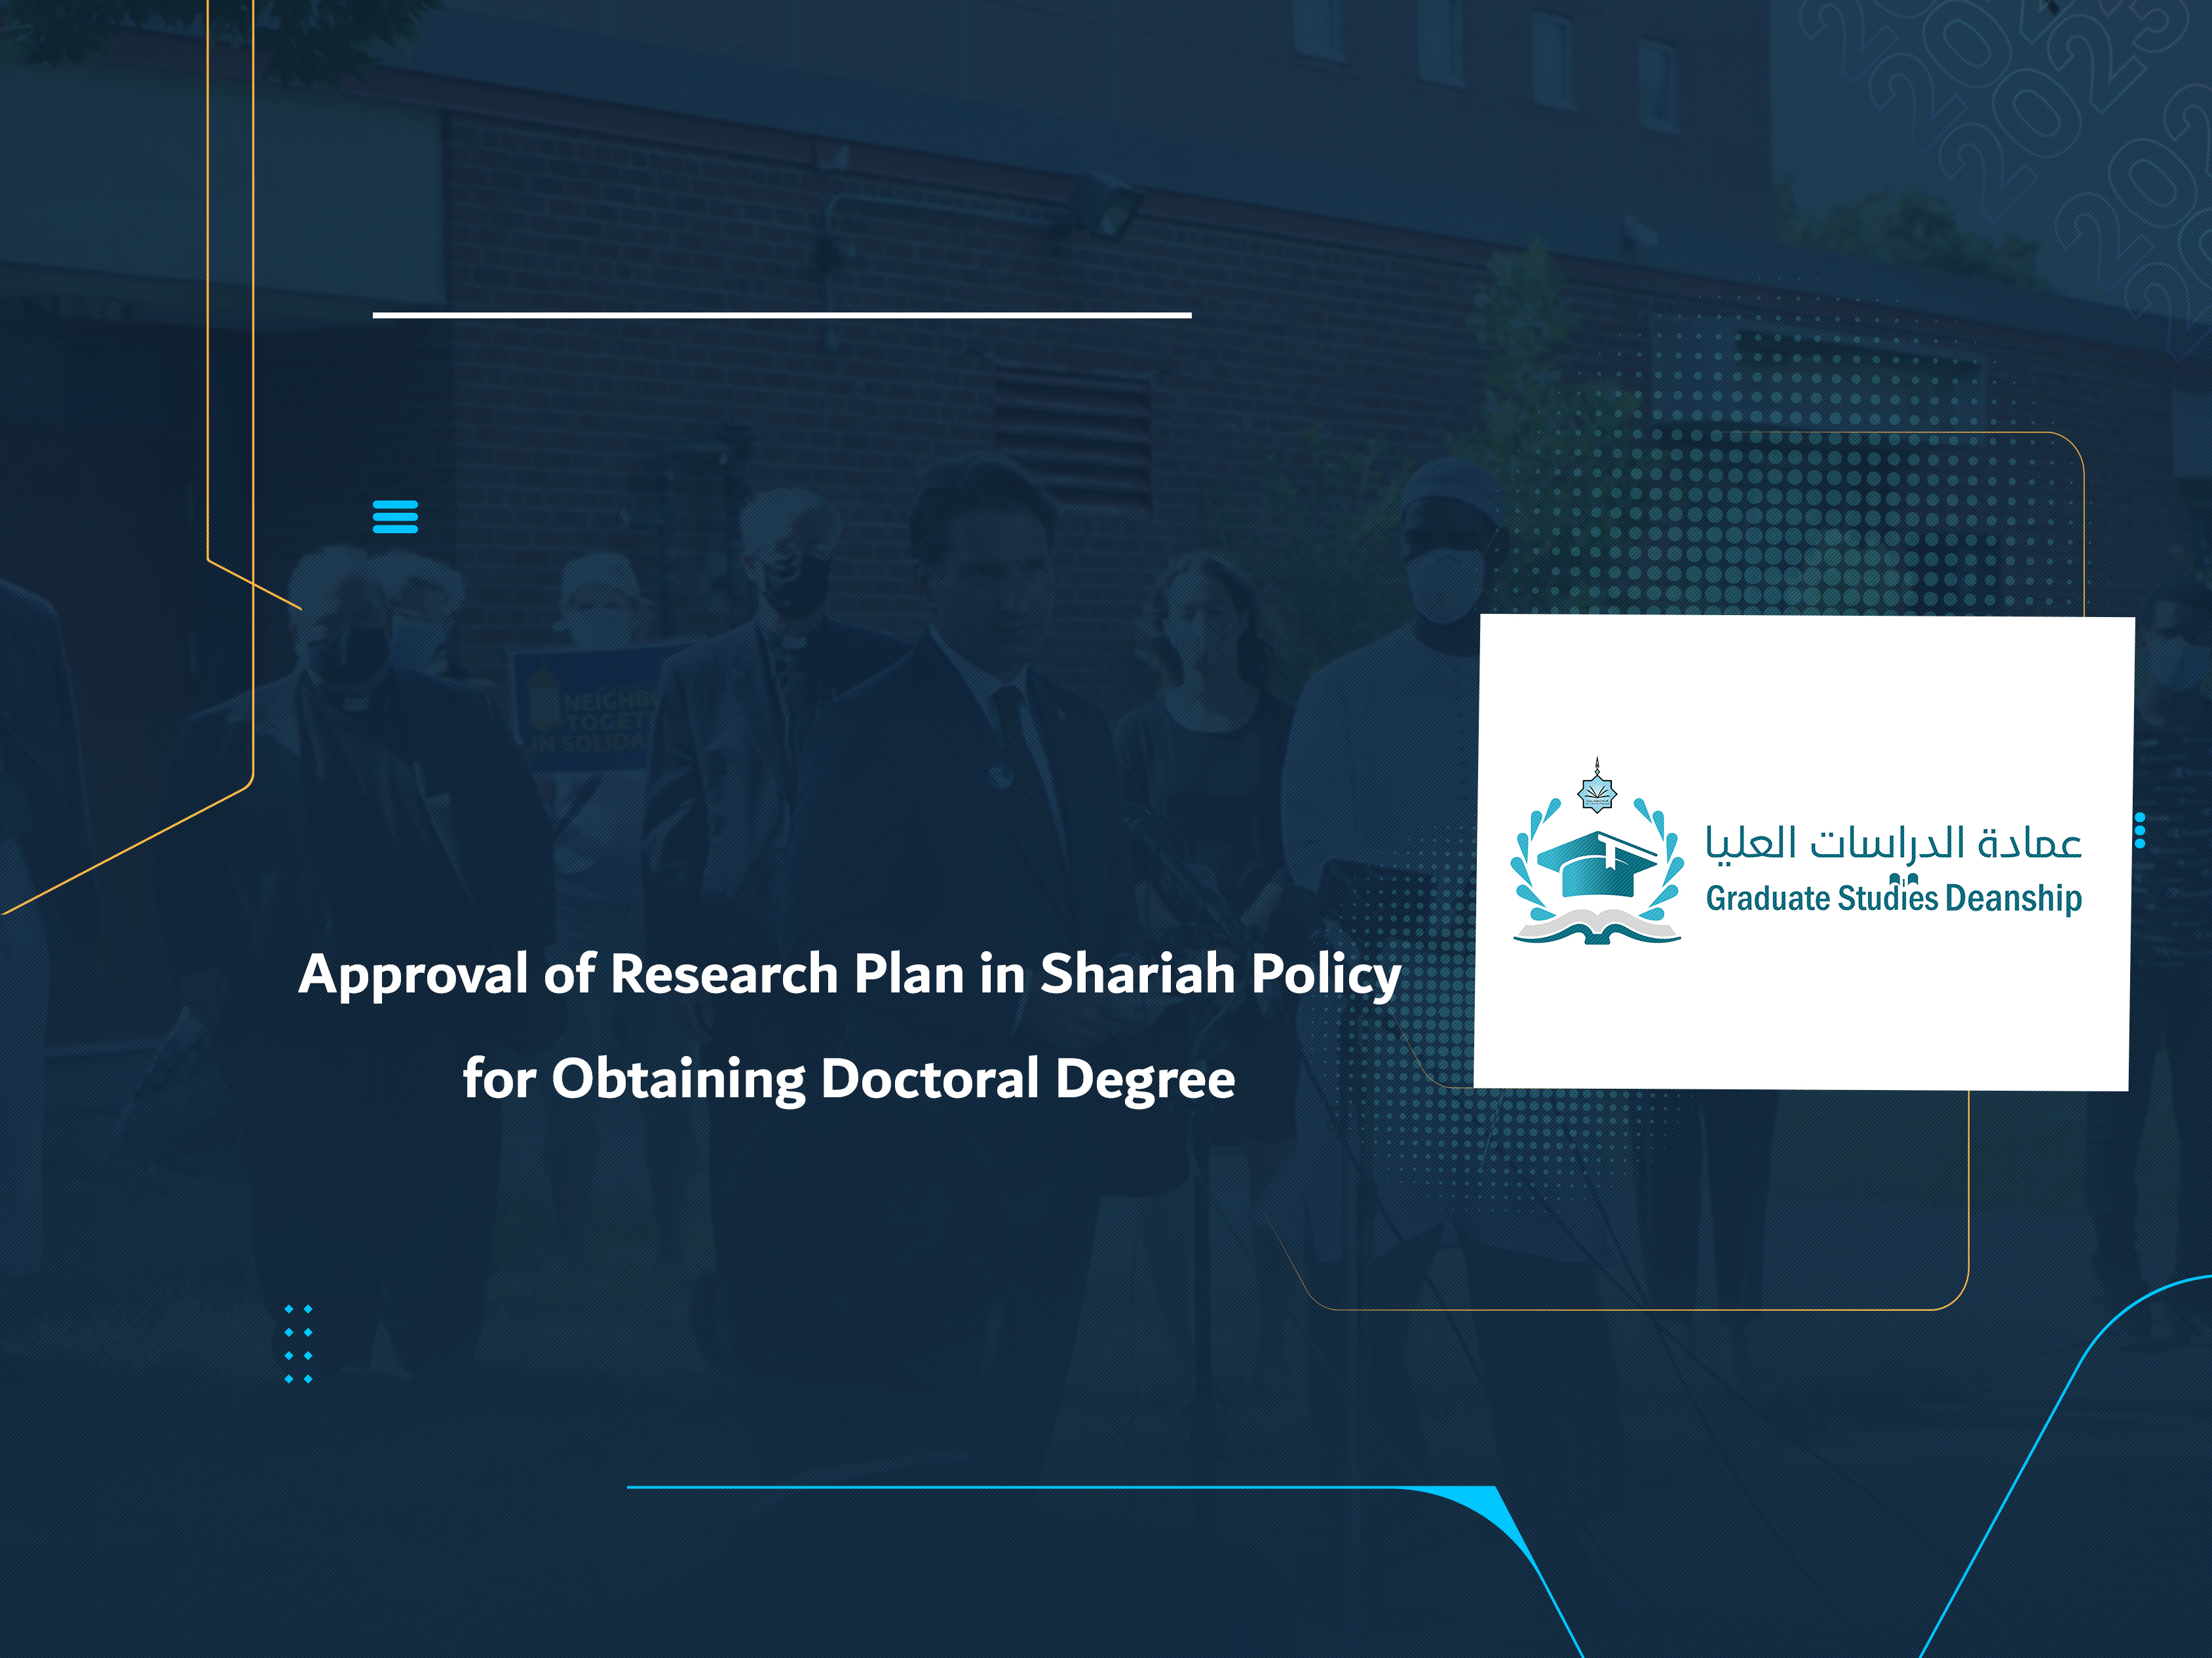 Approval of Research Plan in Shariah Policy for Obtaining Doctoral Degree